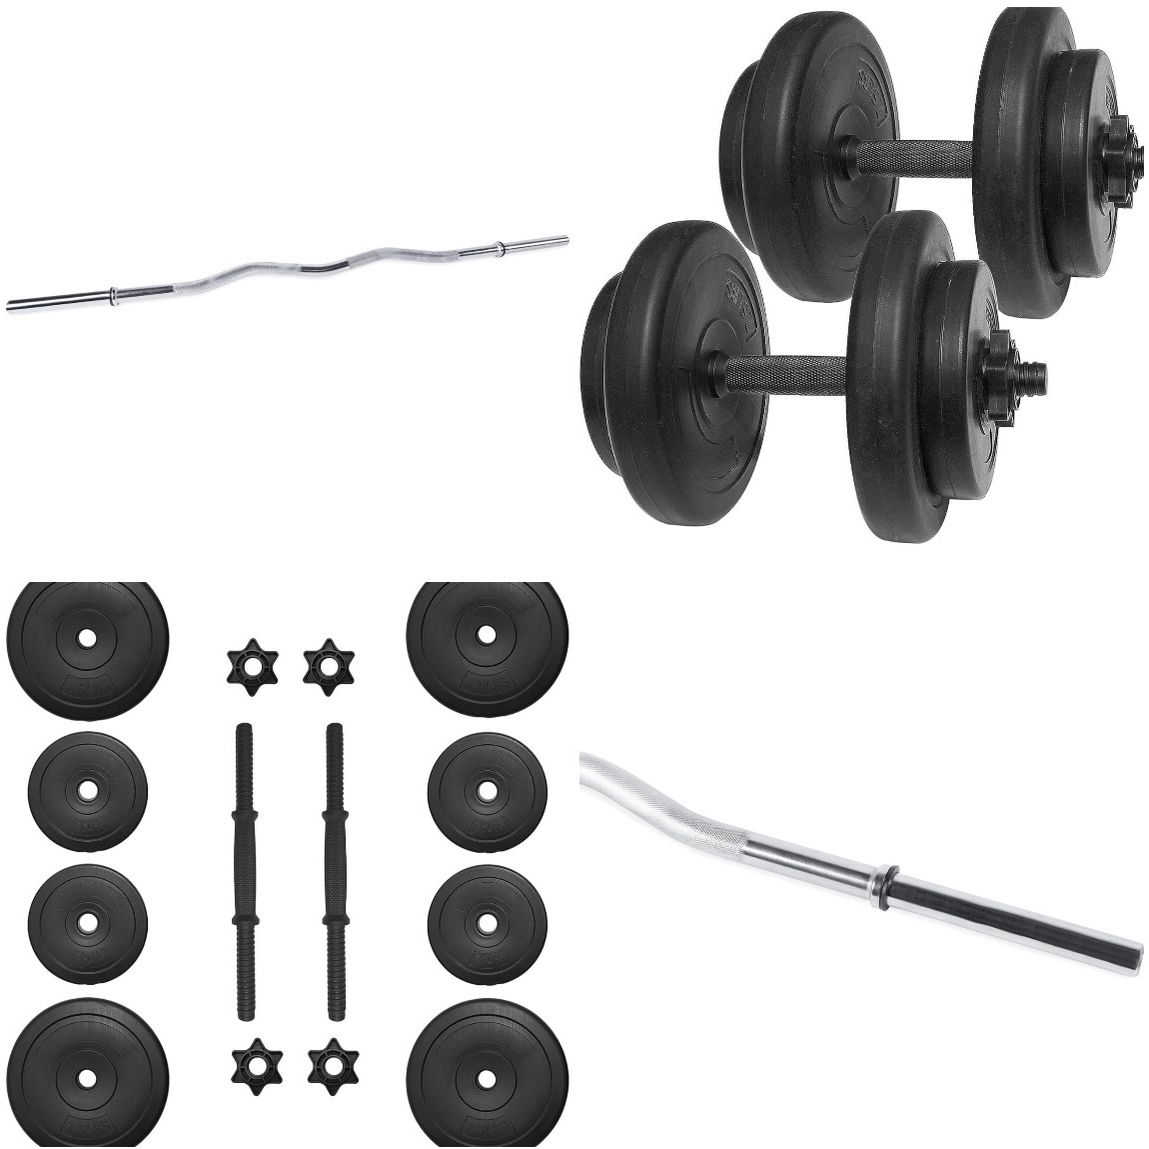 40lbs Of Weights 2-dumbell Handles / Curling Bar/ All New